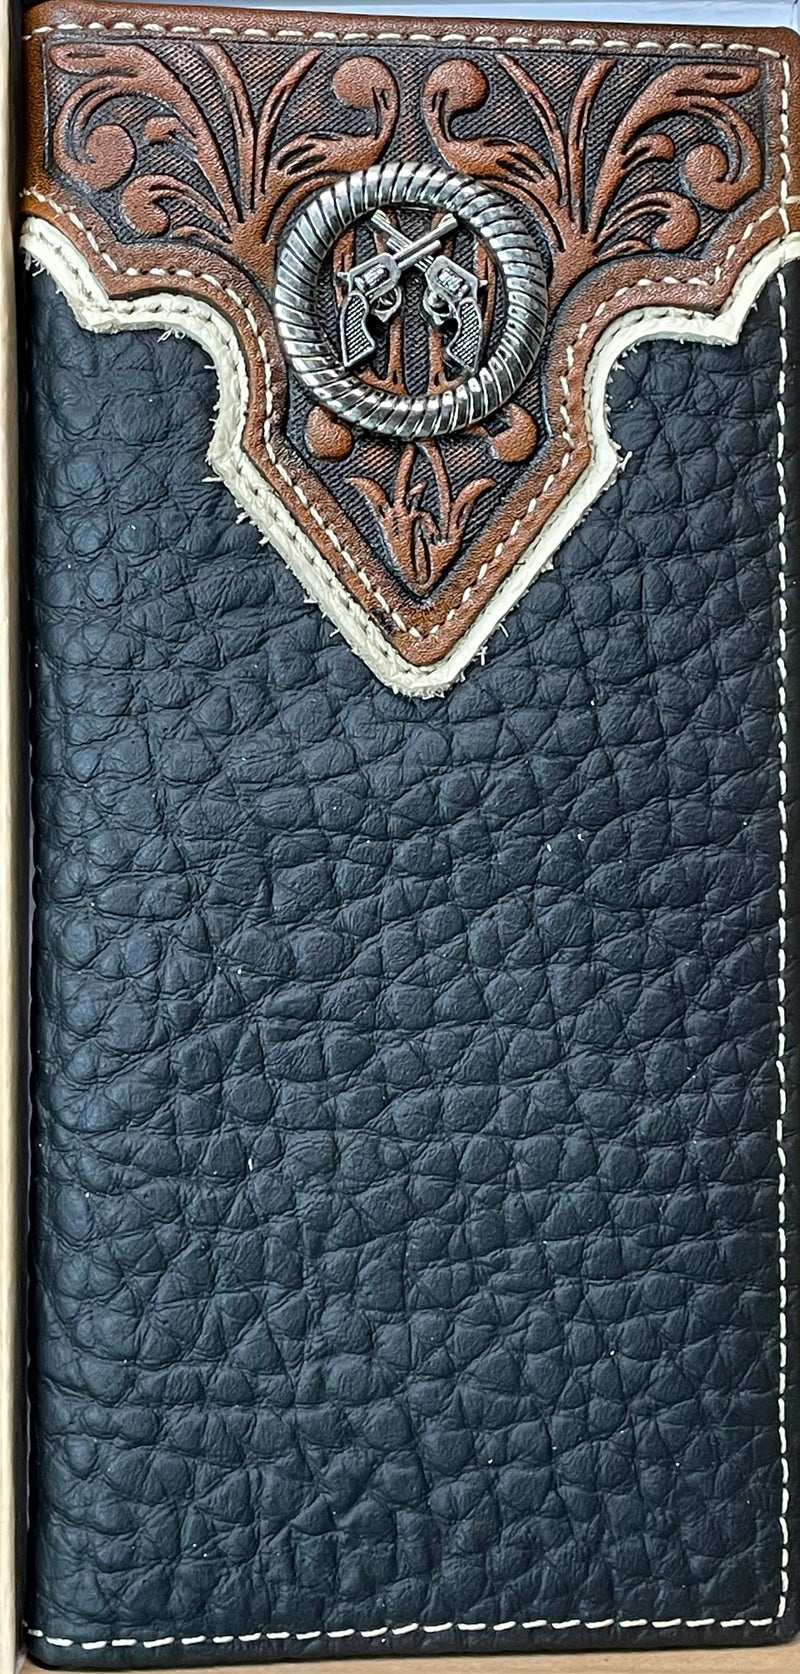 Top Notch Accessories HF106BK Black Floral Embossed w/Pistol Concho Wallet